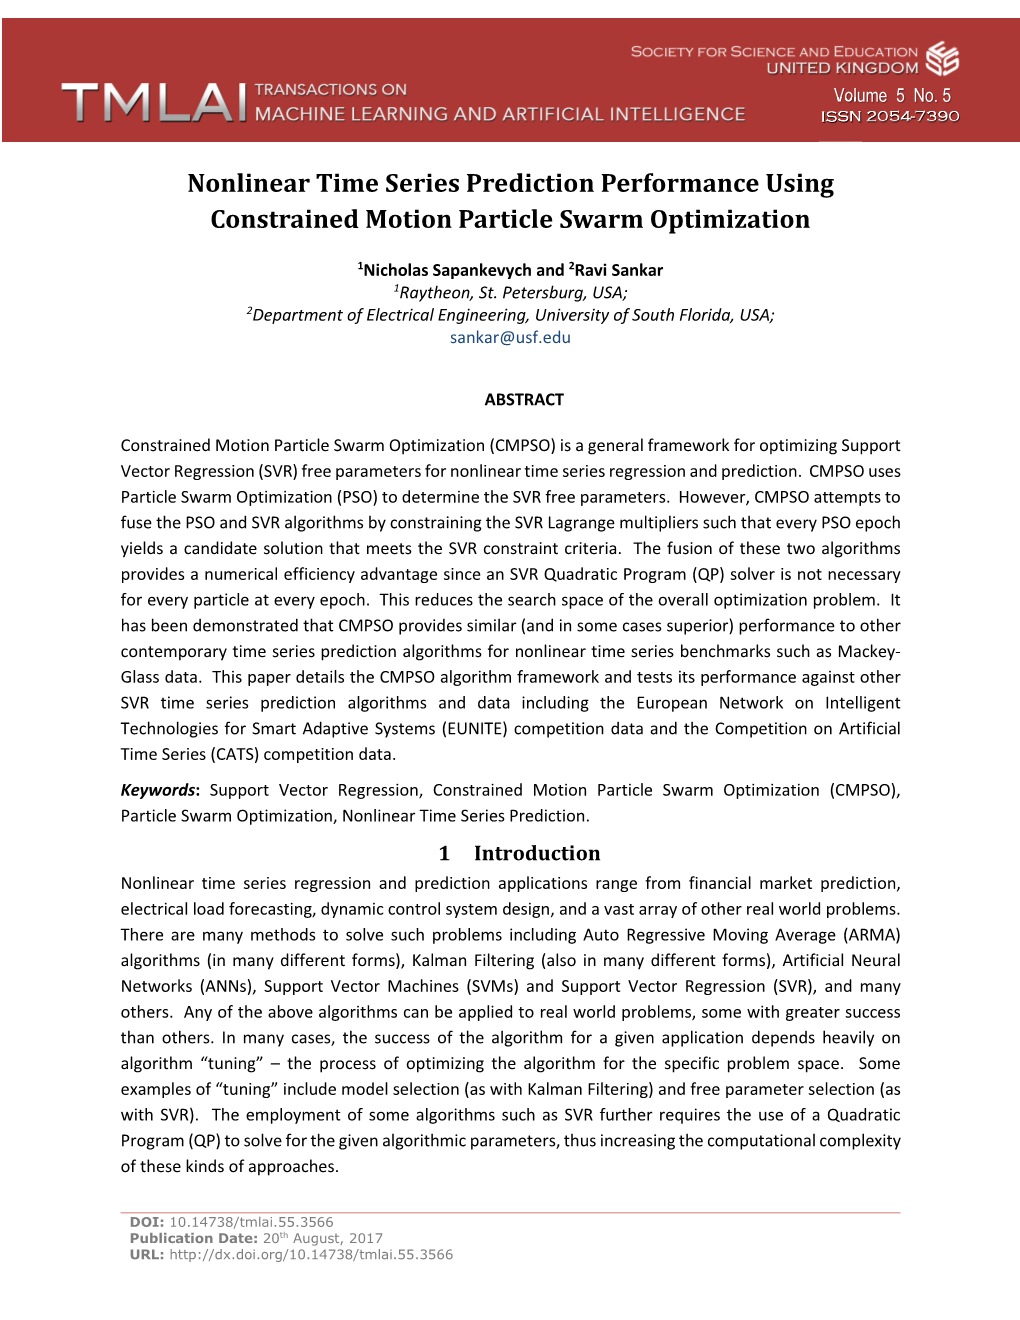 Nonlinear Time Series Prediction Performance Using Constrained Motion Particle Swarm Optimization